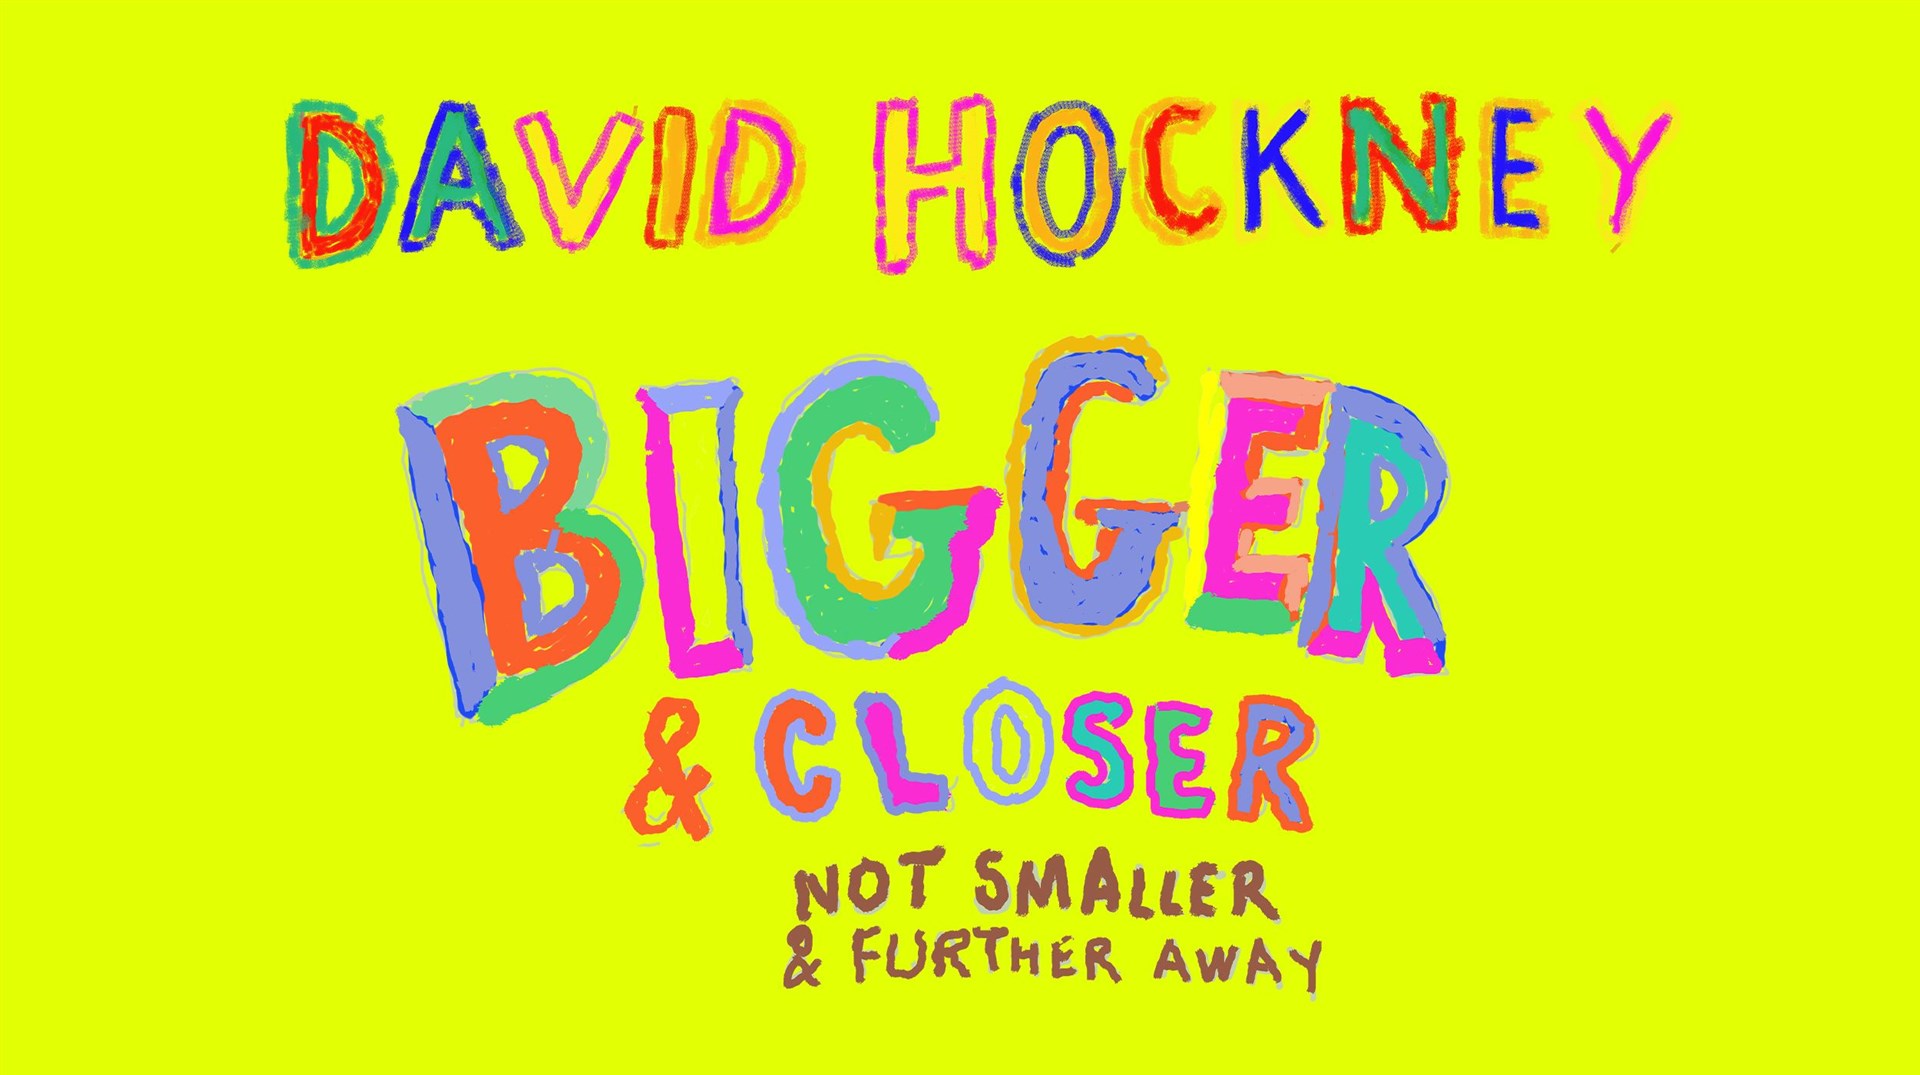 David Hockney: Bigger & Closer (Not Smaller & Further Away) will give visitors the opportunity to engage with audio and visual elements to follow a journey through Hockney’s art (David Hockney/PA)